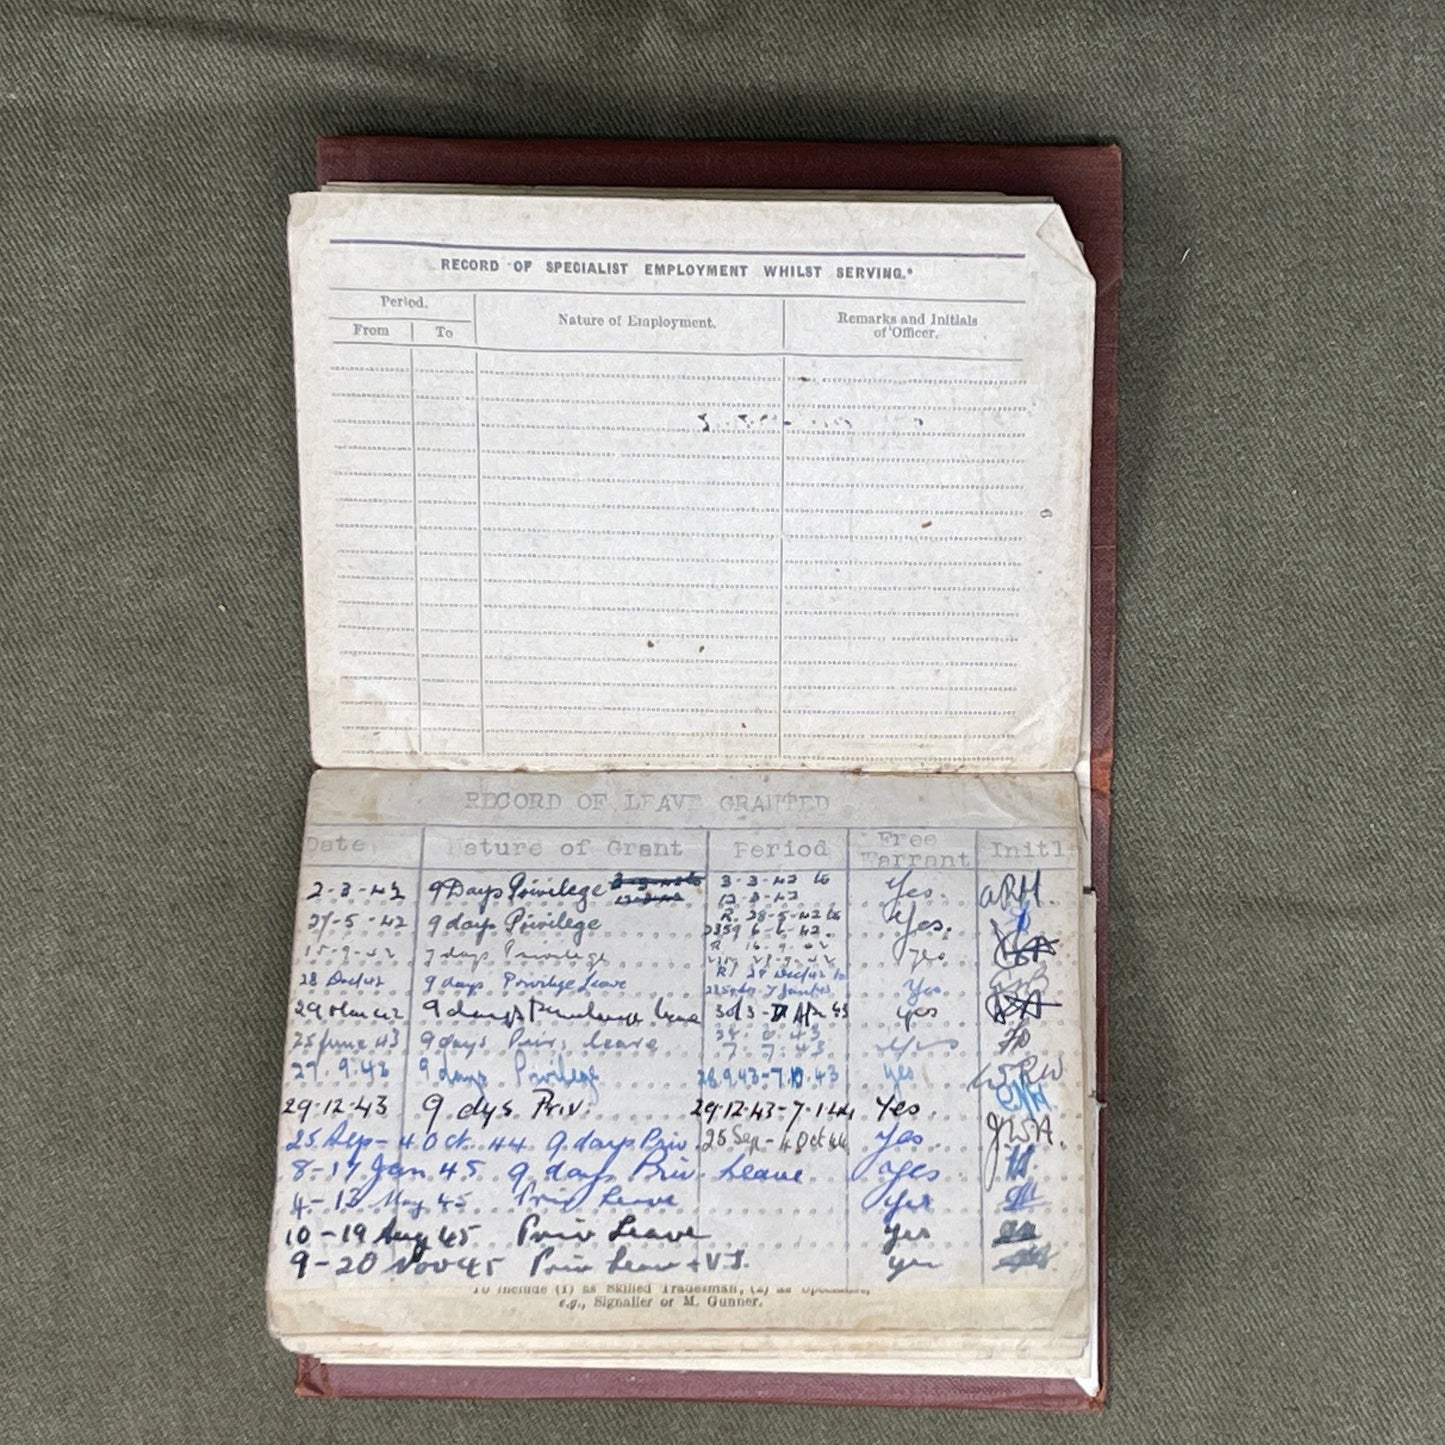 A really interesting selection of original WW2 Service paperwork relating to Arthur Charles CARTWRIGHTwho served in the Royal Signals his service records show that he was a Signals OP. K/B Group B and a TS.BO. Class D